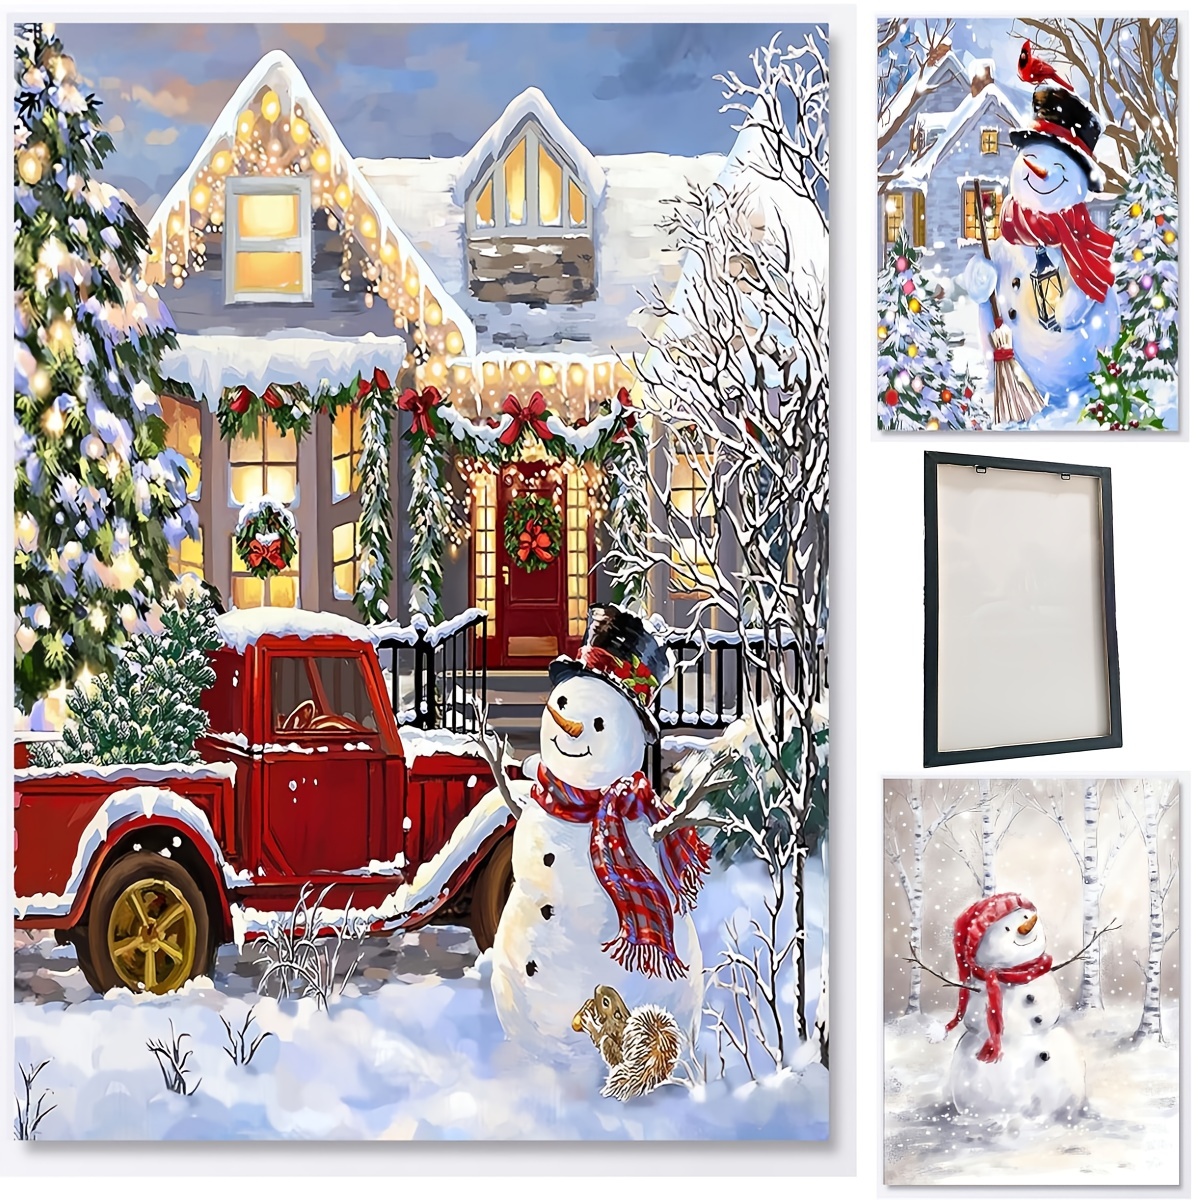  Diamond Painting Kits for Adults, DIY 5D Christmas Day Diamond  Painting Kits Full Drill Fall Diamond Art Animals and Snowmen Diamond  Painting Craft for Home Wall Art Decor 12x18 inch